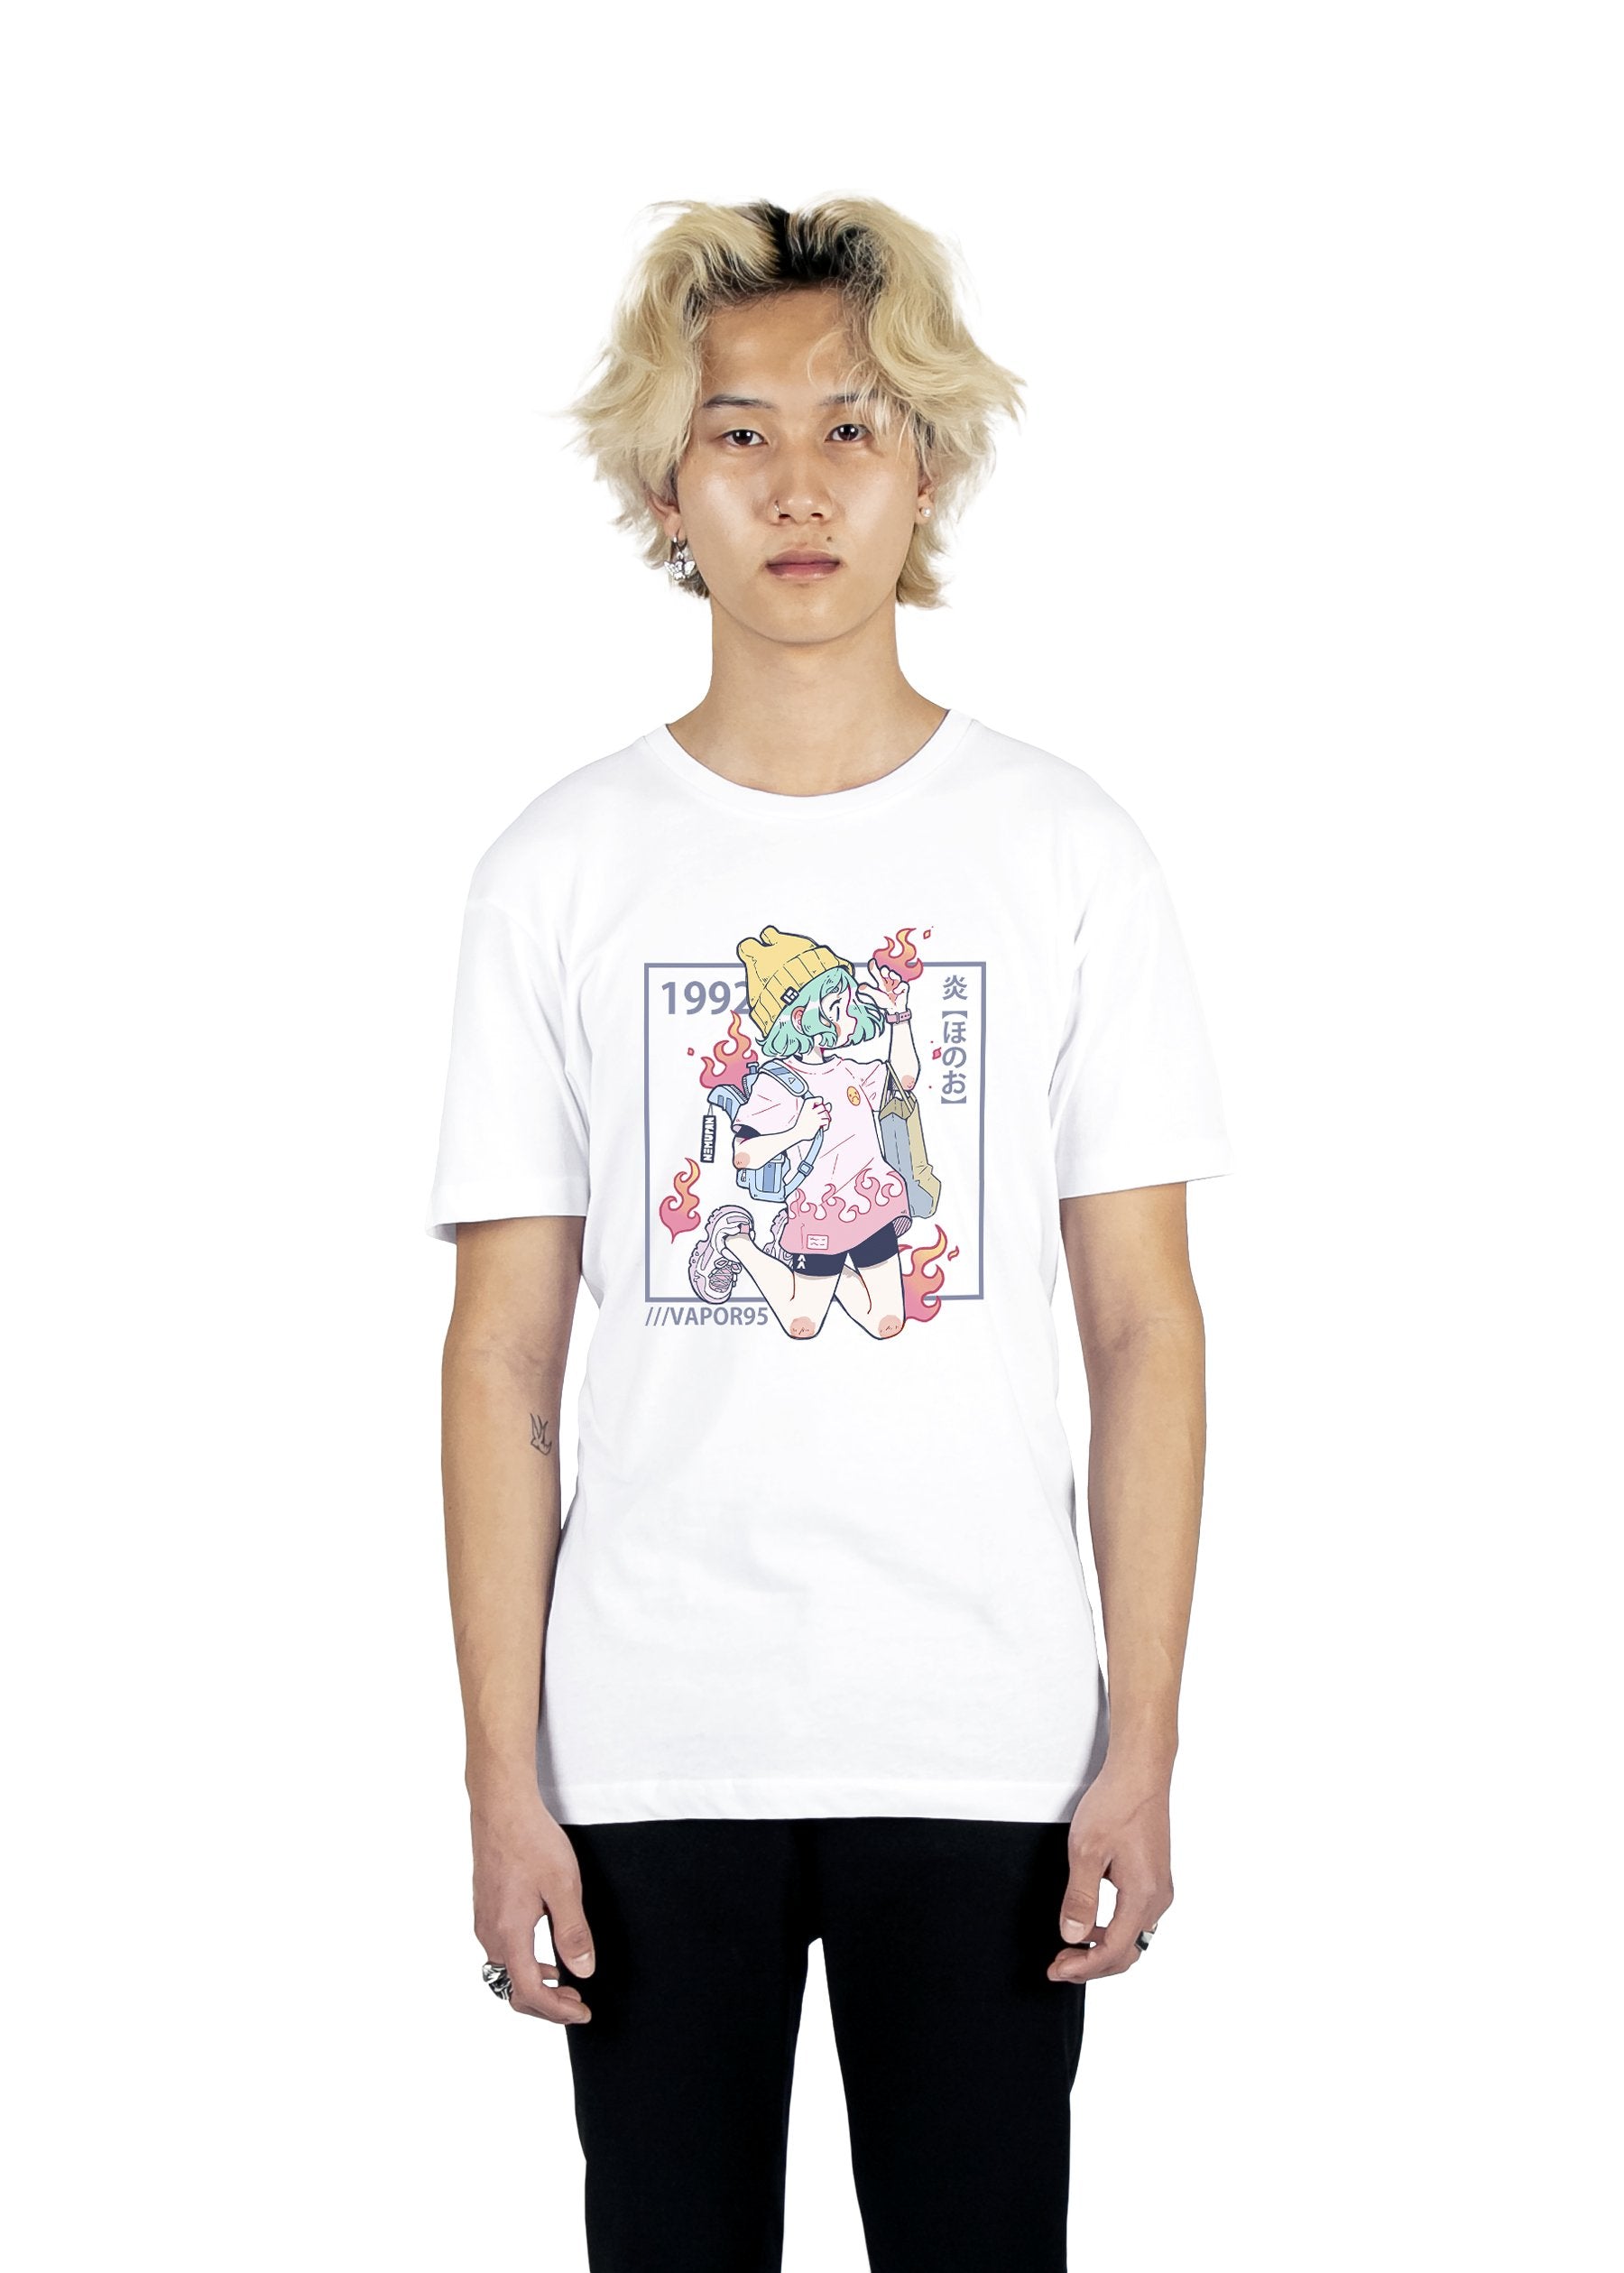 Playing With Fire Tee Graphic Tee DTG White S